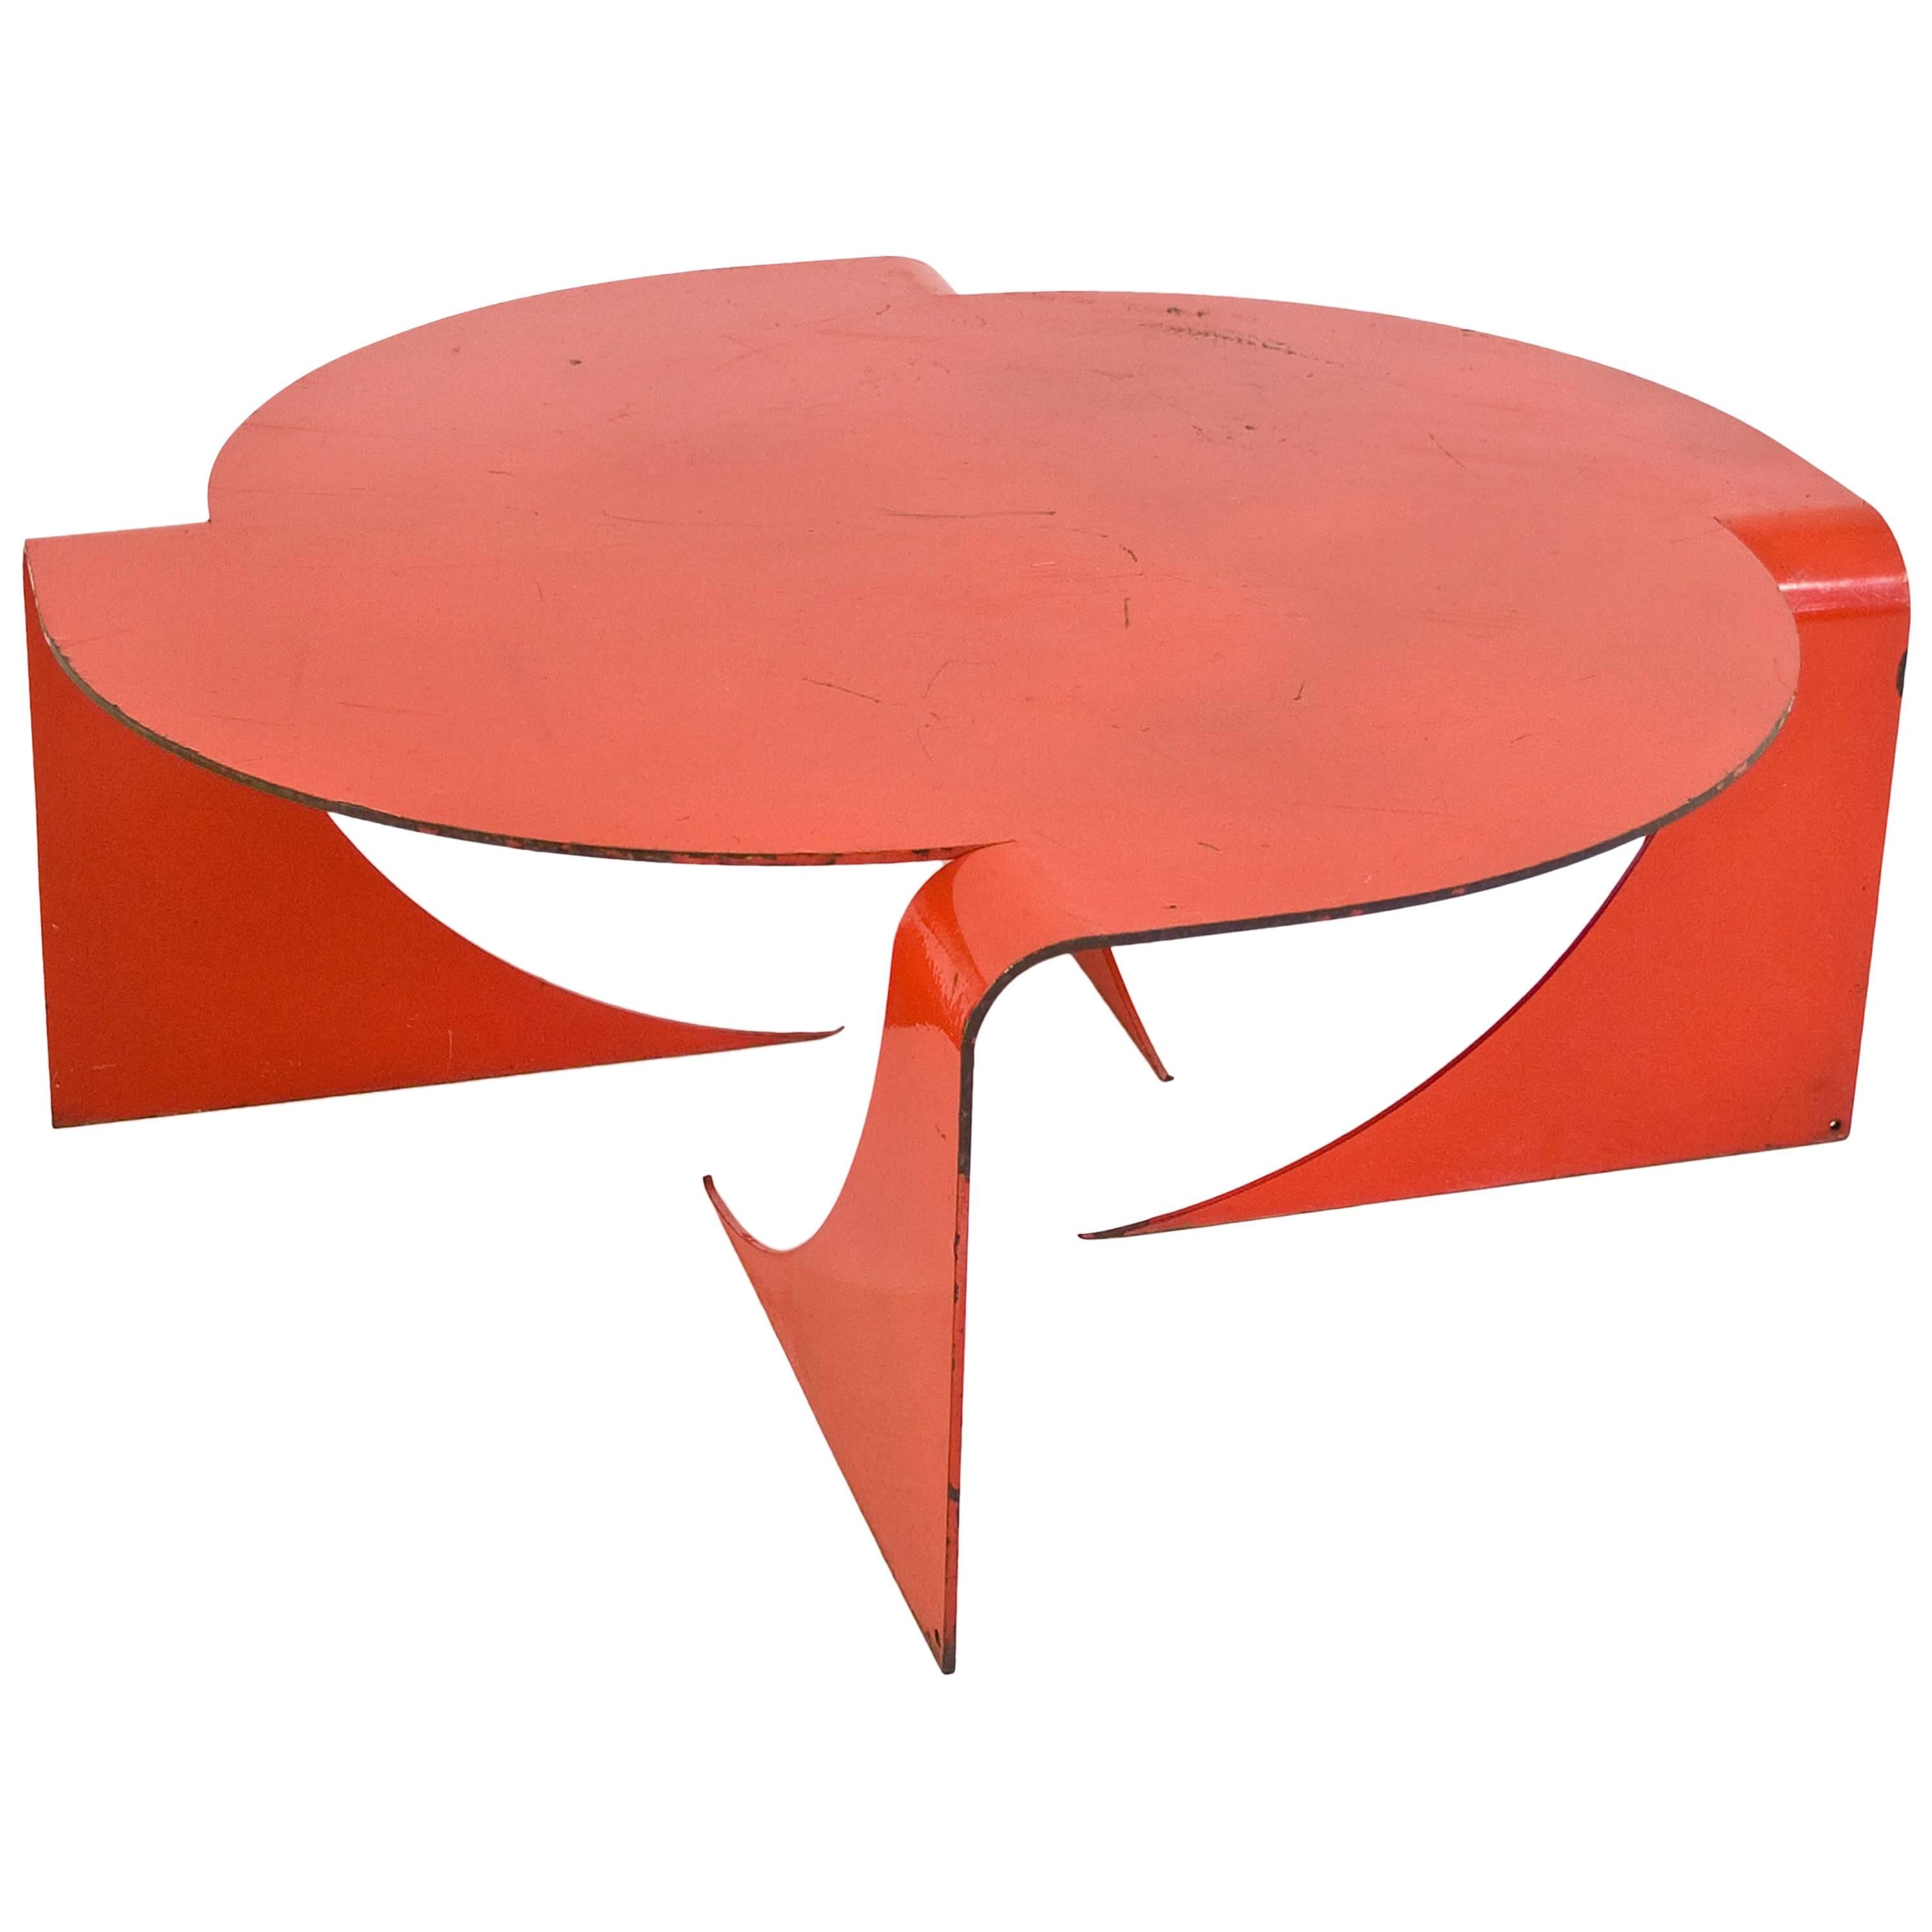 Red Steel "Manifold" Coffee Table by Anthony Leyland, circa 2009, England